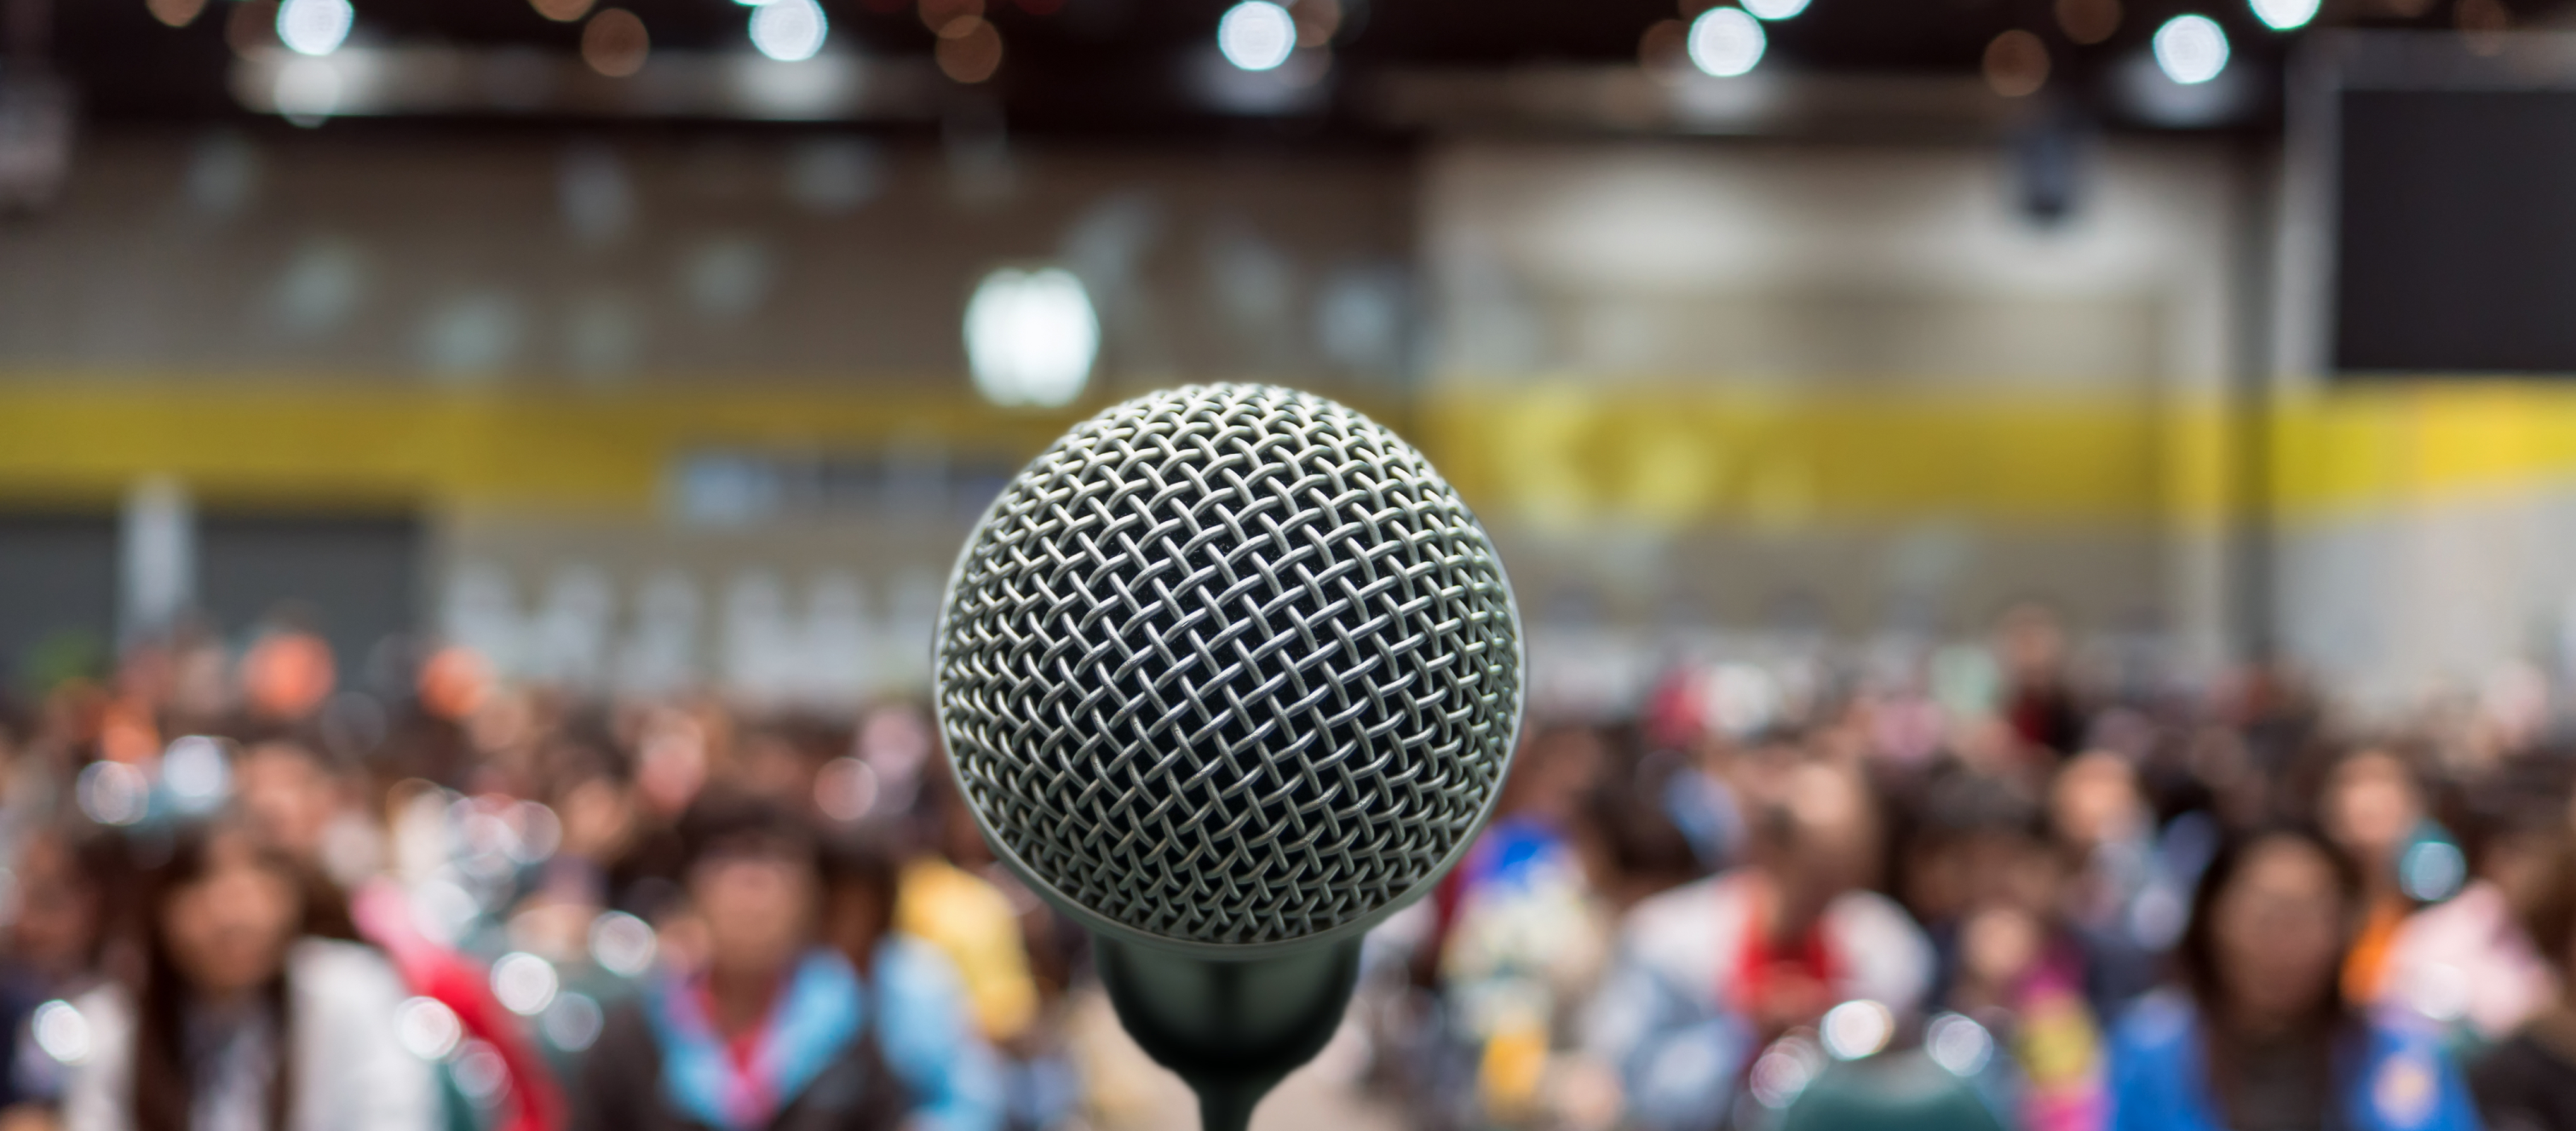 Close-up view of microphone, with an out of focus view of a crowd of seated people in the background